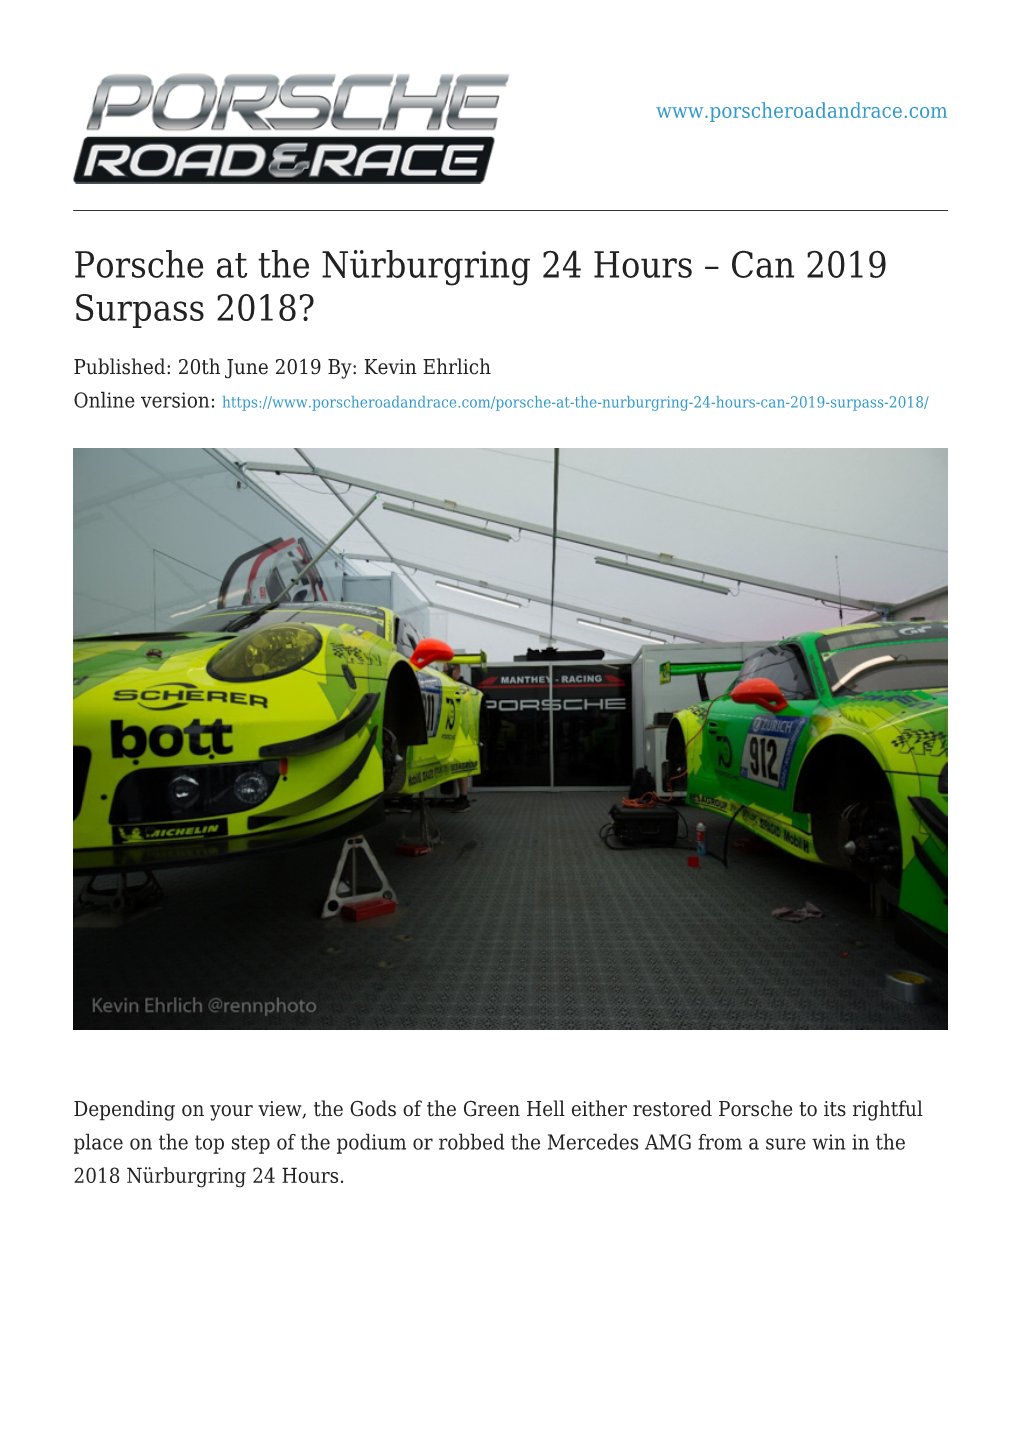 Porsche at the Nürburgring 24 Hours – Can 2019 Surpass 2018?